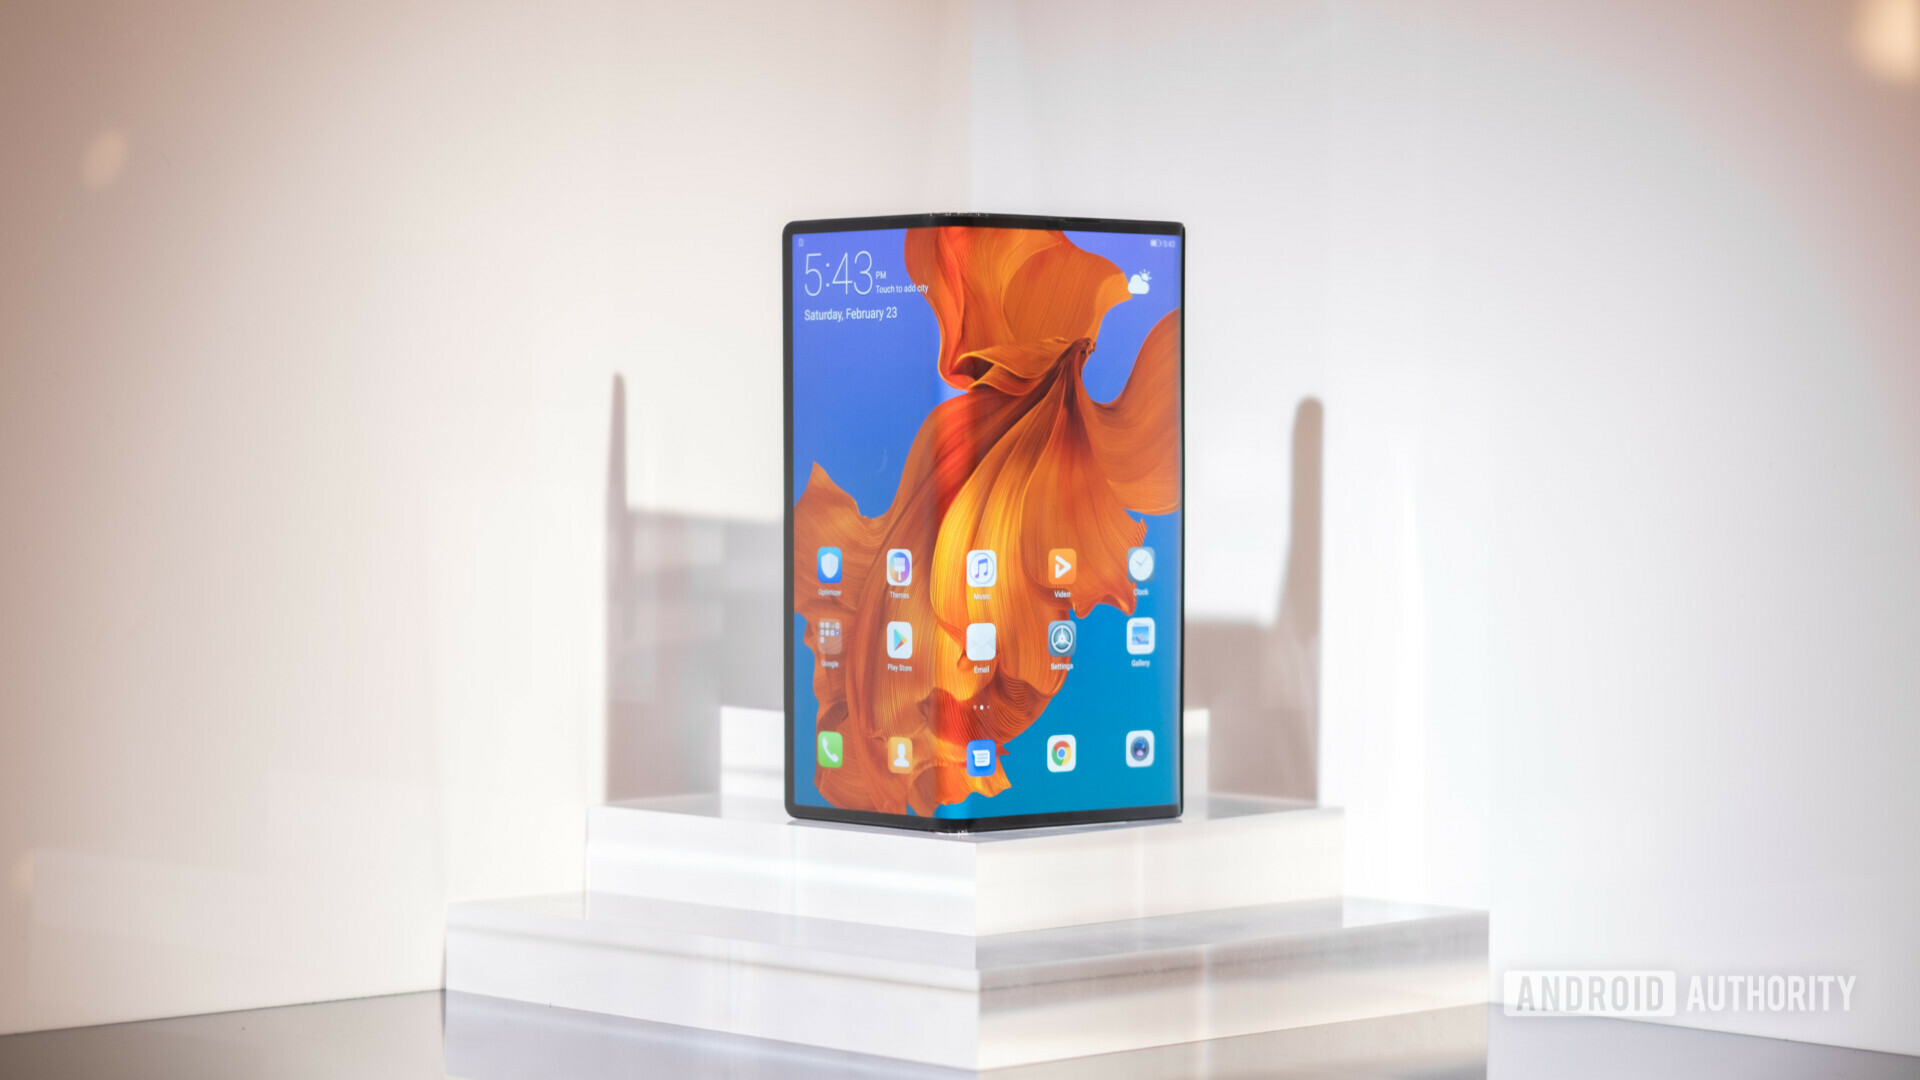 Huawei's new foldable phone the Mate X showcased on a white background at MWC 2019